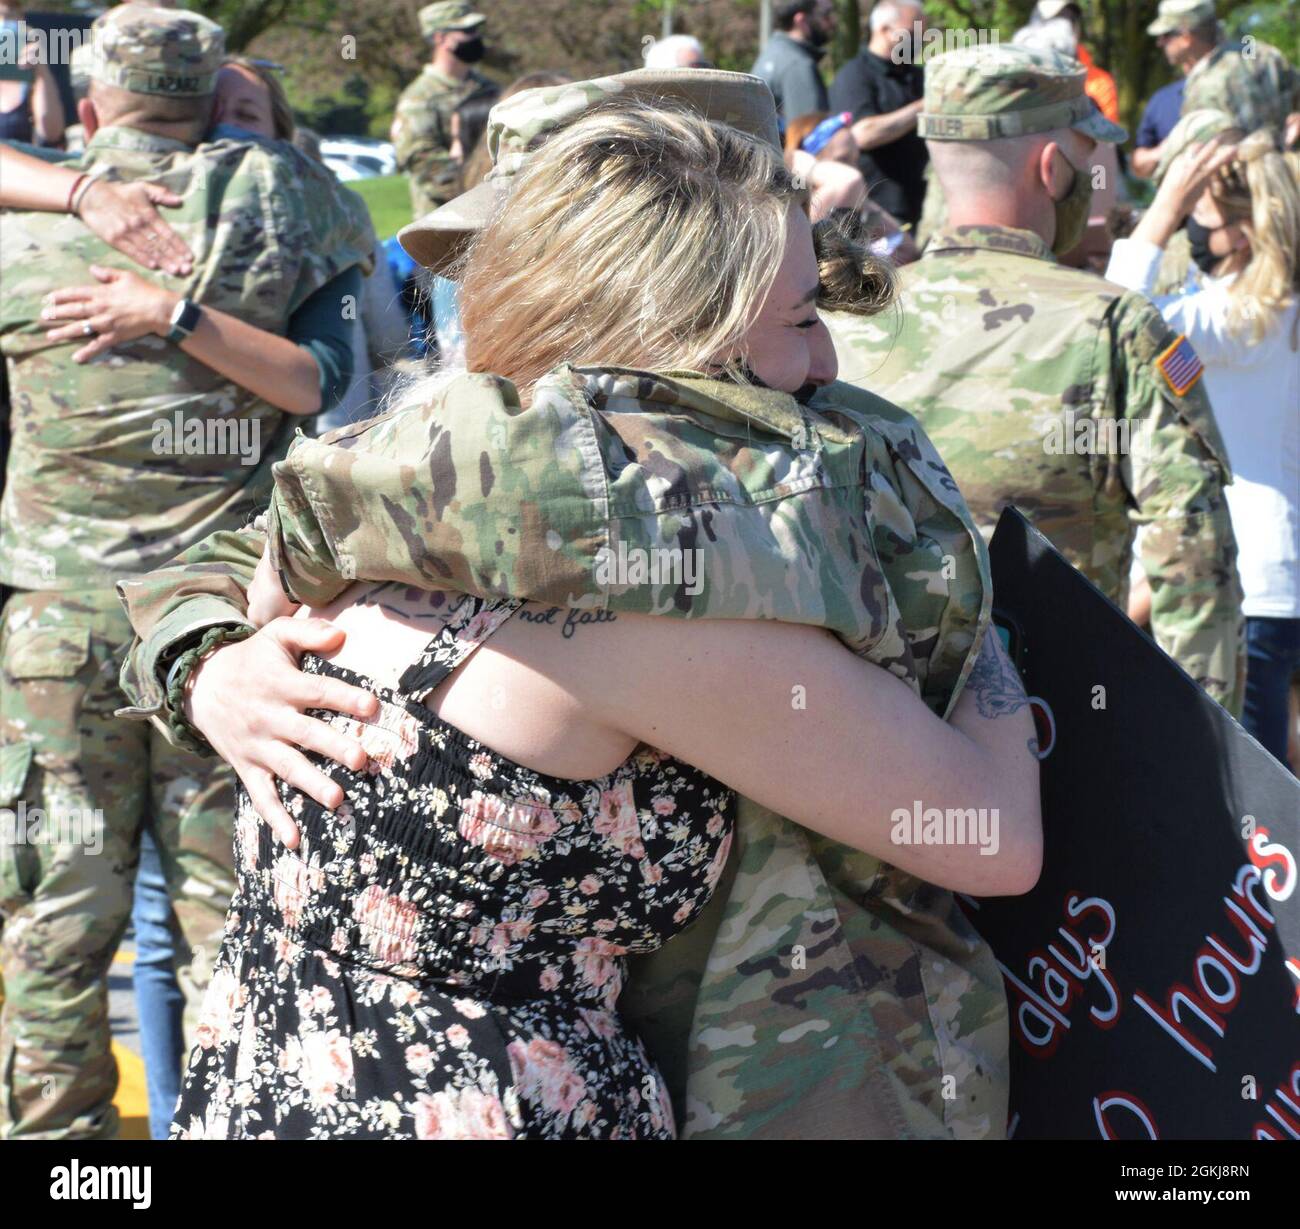 Chelsea Stengel hugs Staff Sgt. Dayna Brown after waiting for more than 11 months. About 165 Illinois Army National Guard Soldiers returned April 30 to Illinois after an 11-month deployment to Ukraine where the unit formed “Task Force Illini” as the command element of Joint Multinational Training Group-Ukraine, which is responsible for training, advising and mentoring the Ukrainian cadre at Combat Training Center-Yavoriv, Ukraine to improve Ukraine’s training capacity and defense capabilities. Headquarters Headquarters Company of the 33rd Infantry Brigade Combat Team flew into Willard Airport Stock Photo